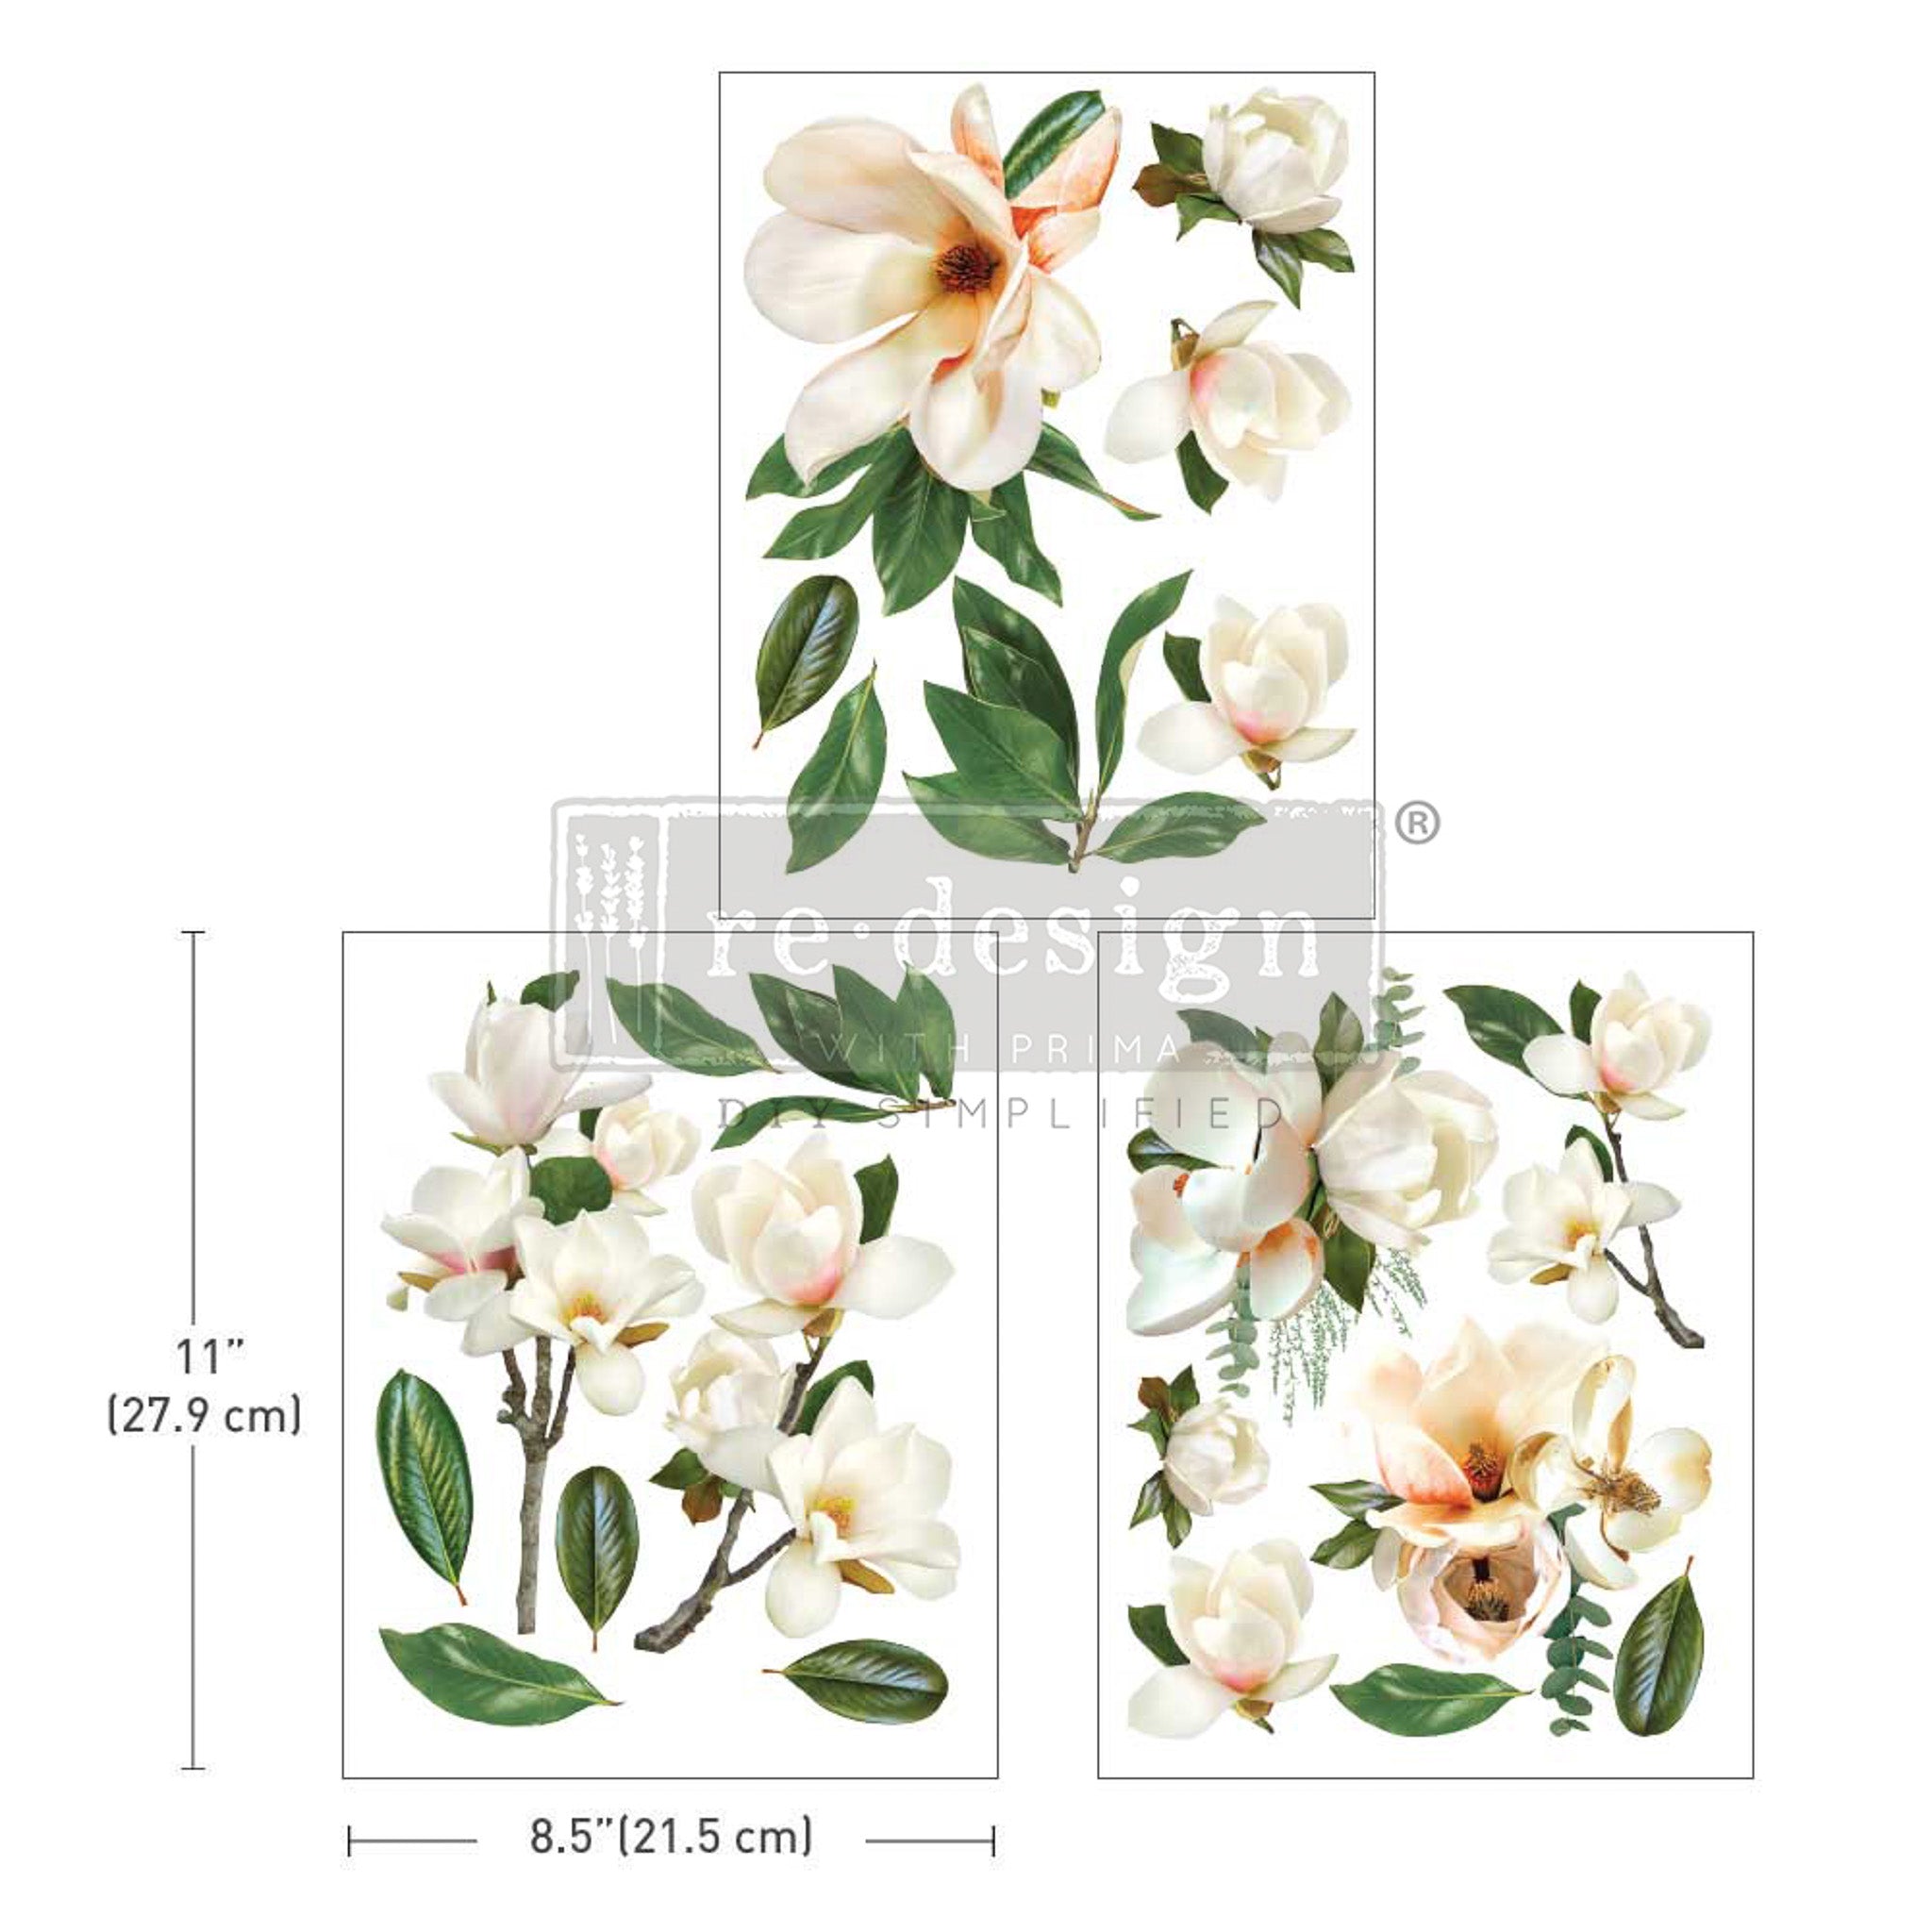 Three sheets of ReDesign with Prima's La Gran Magnolia small transfer are against a white background. Measurements for 1 sheet reads 11" [27.9 cm] by 8.5" [21.5 cm].